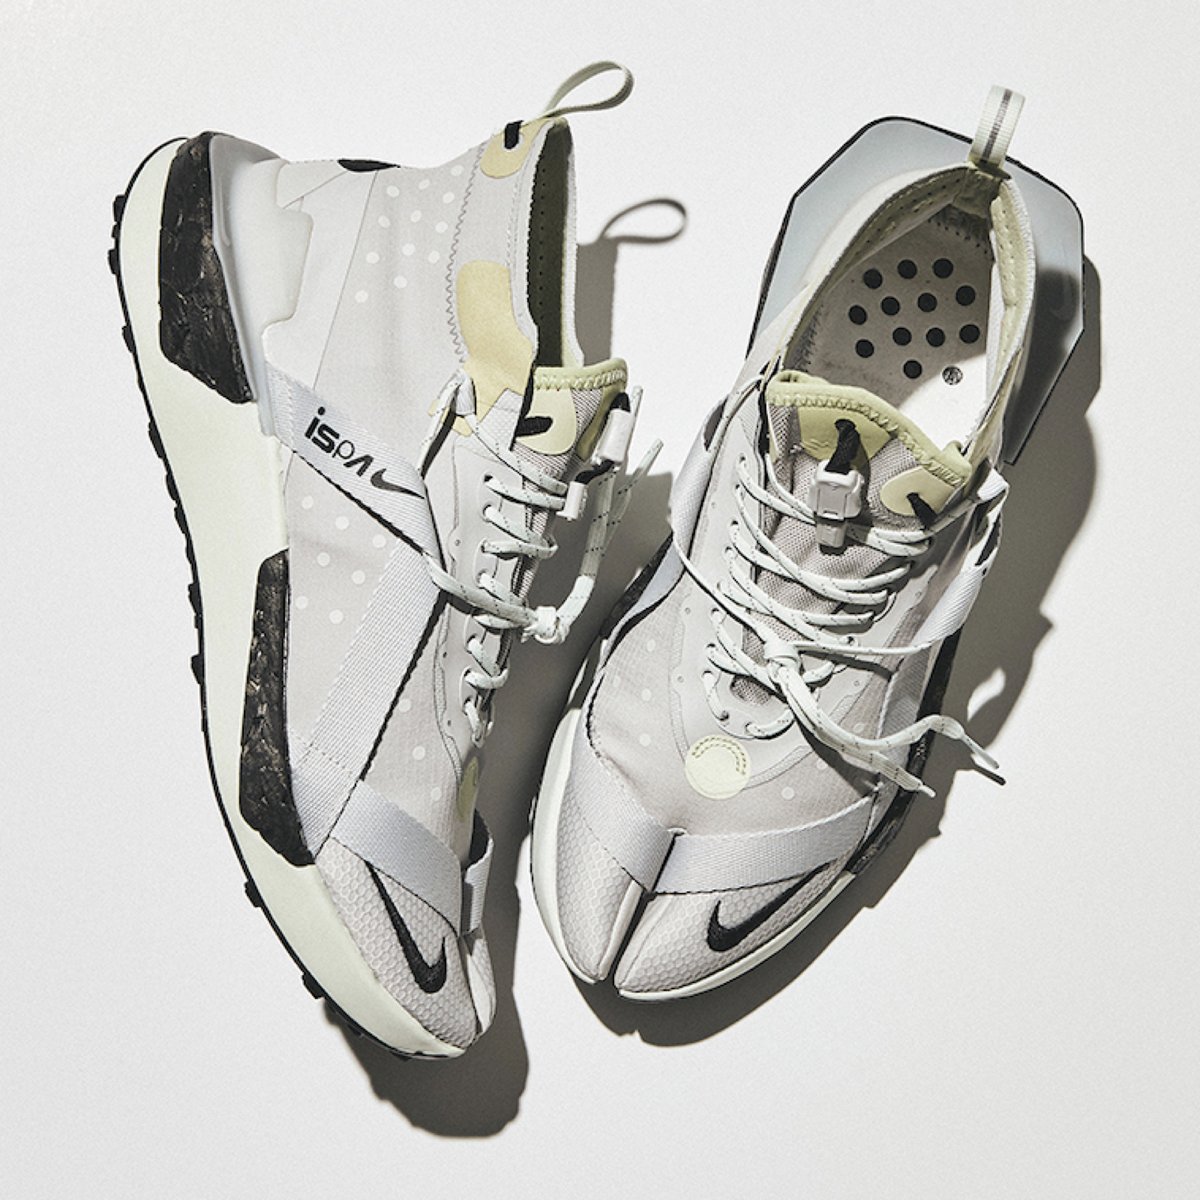 Mecánica táctica pala sivasdescalzo on Twitter: "Taking inspiration from the Tabi shoe, the Nike  ISPA Drifter was made to feel secure when you're on the move. It arrives  with a split toe, deconstructed upper and